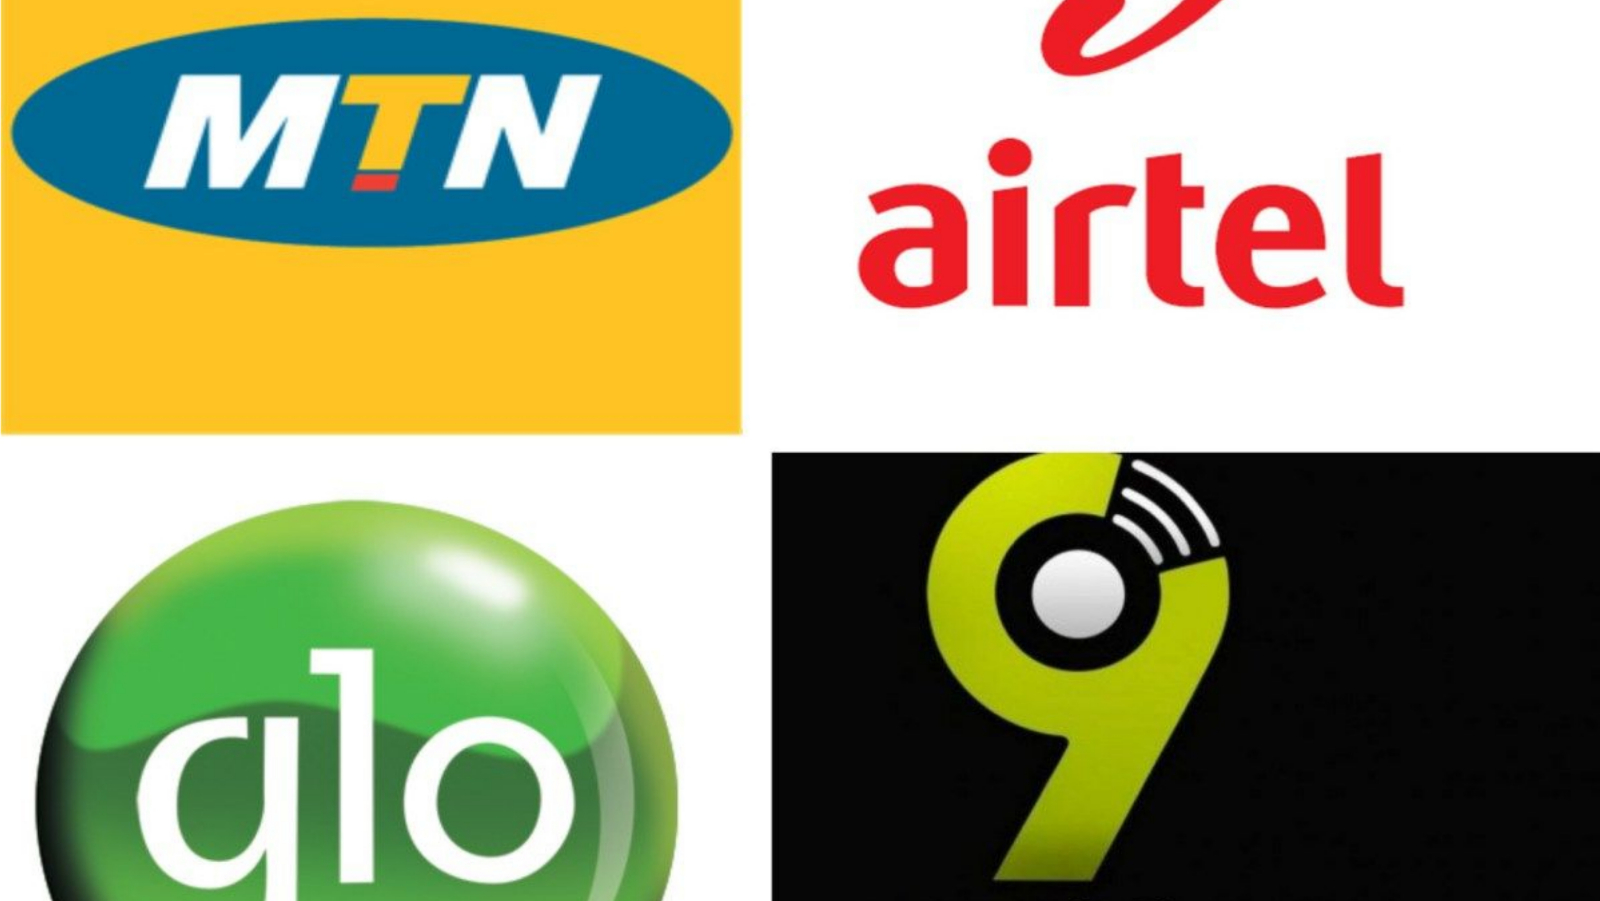 9mobile remains biggest loser as Nigeria’s internet subscriptions drop